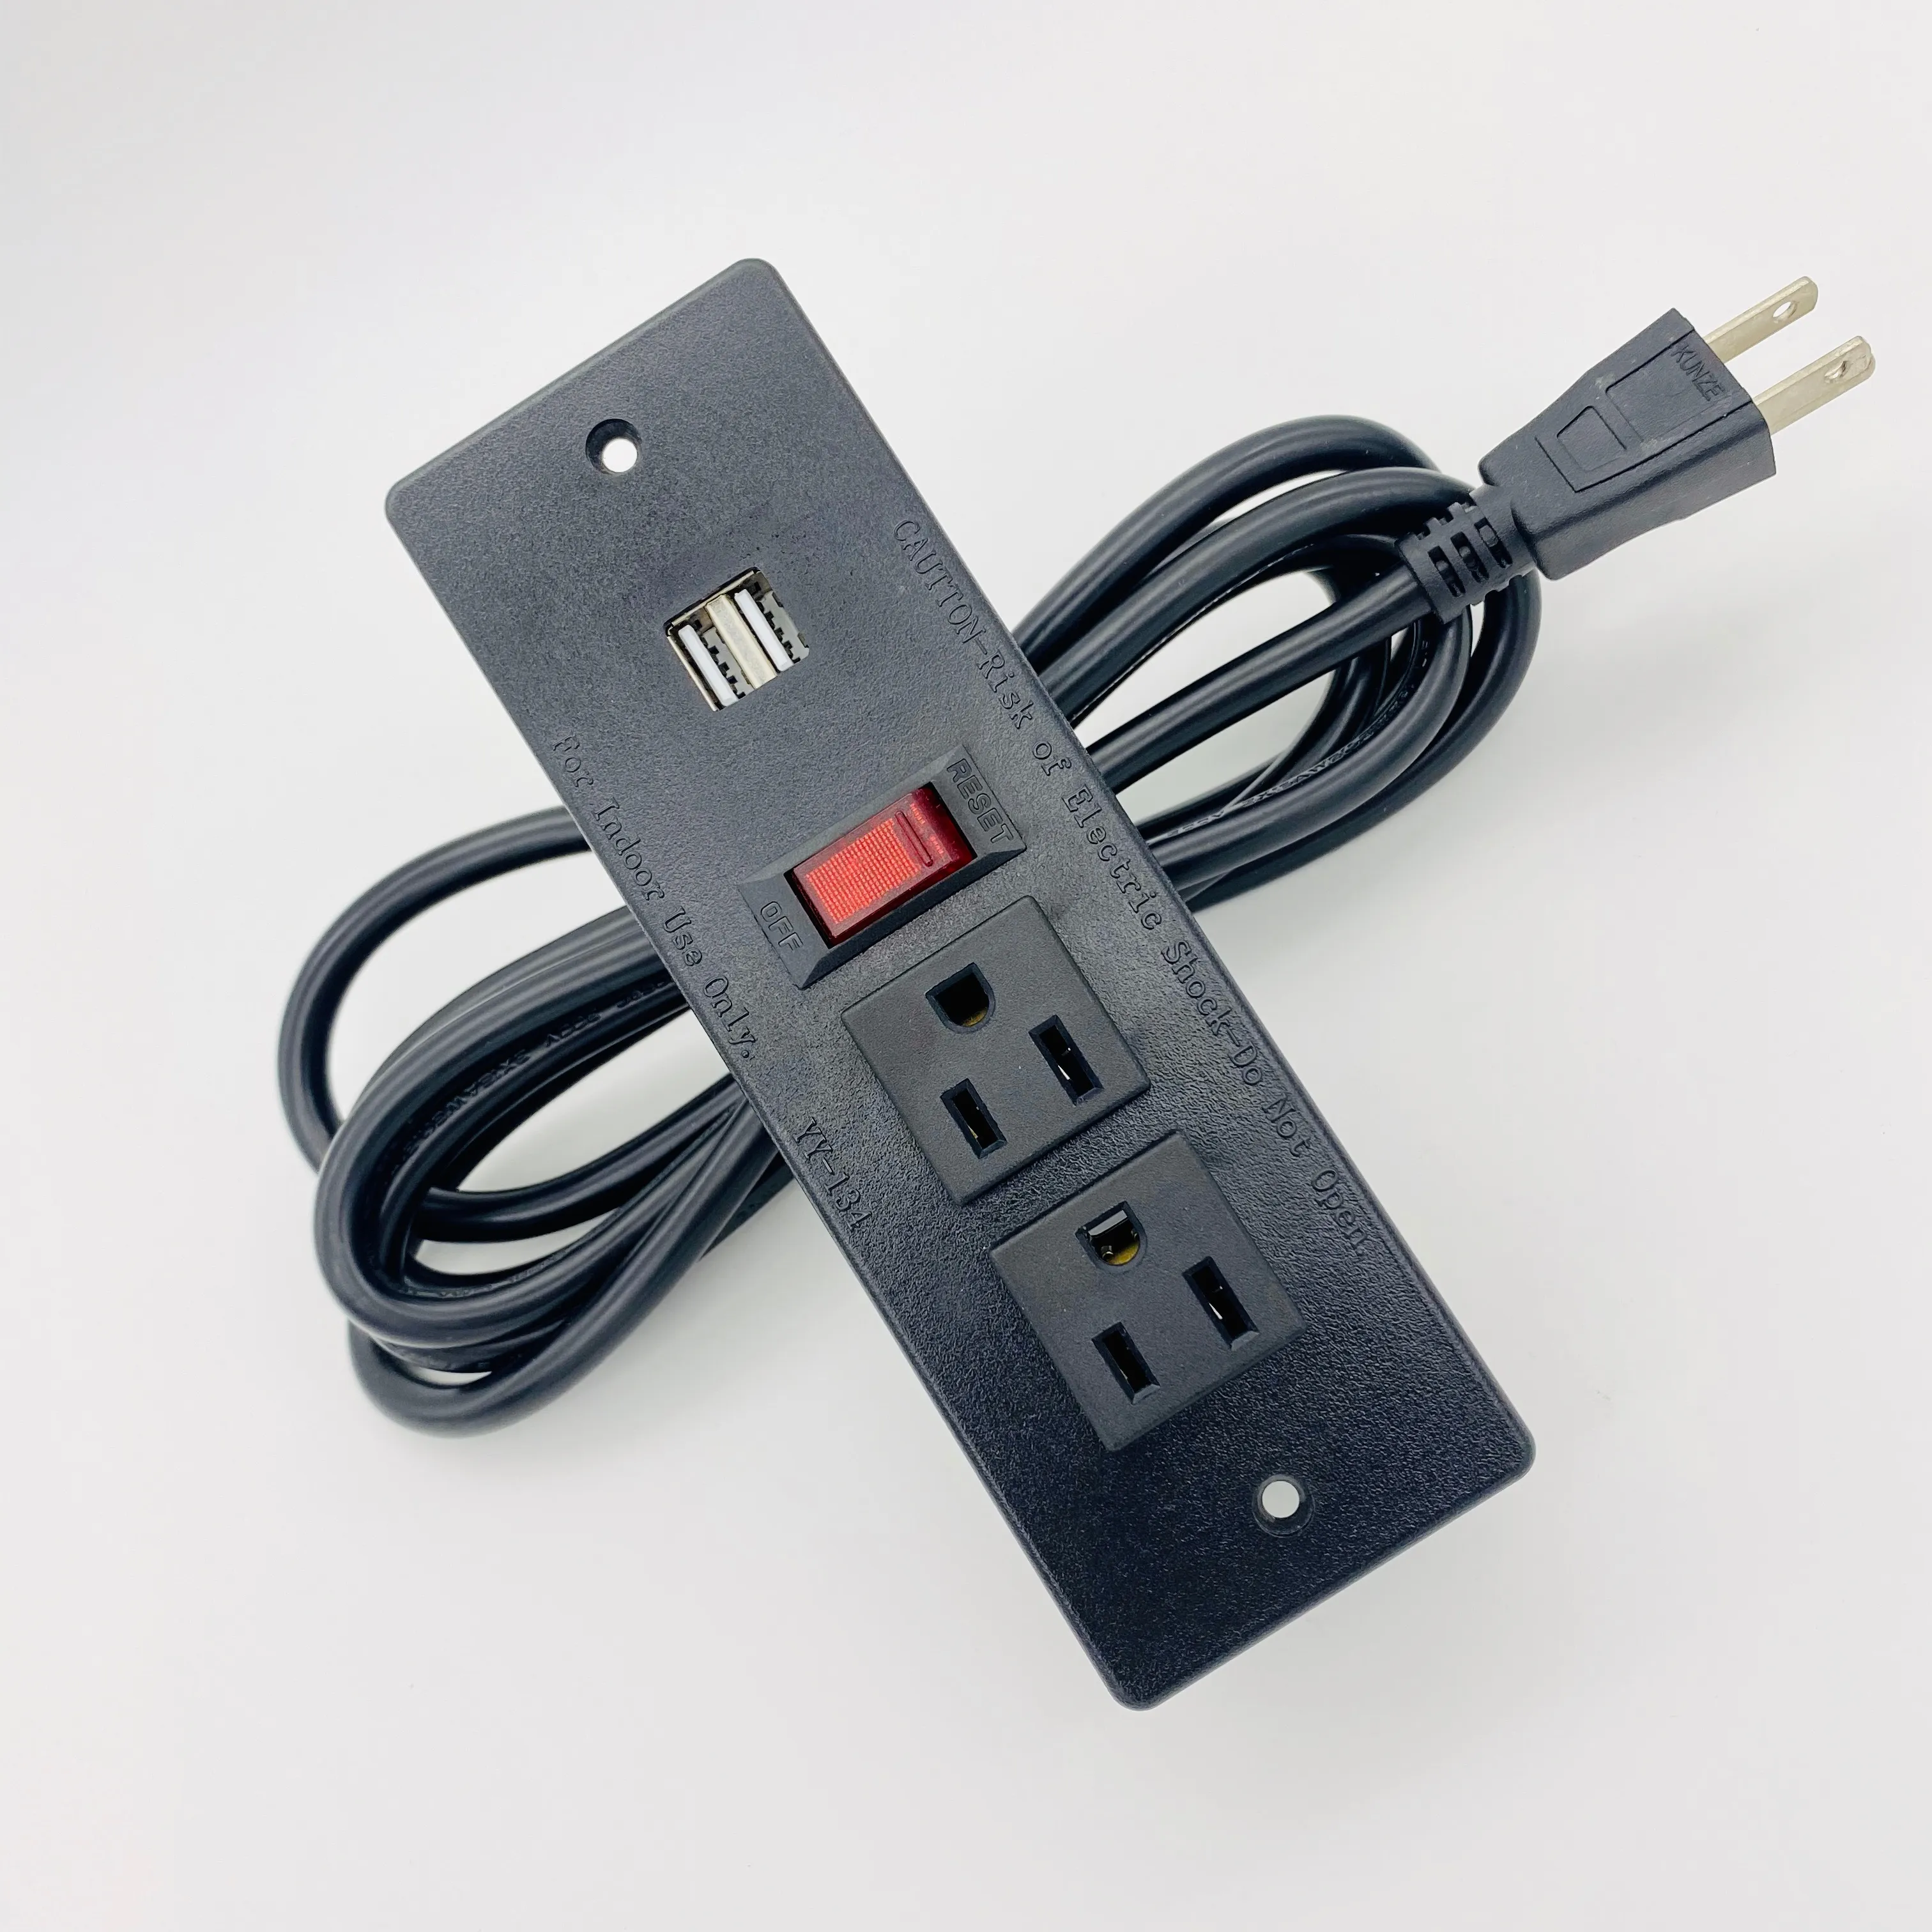 ETL/UL Recessed Installation US type power socket 100-240V/12A/15A power outlet power strip with 2AC+1Switch+2USB